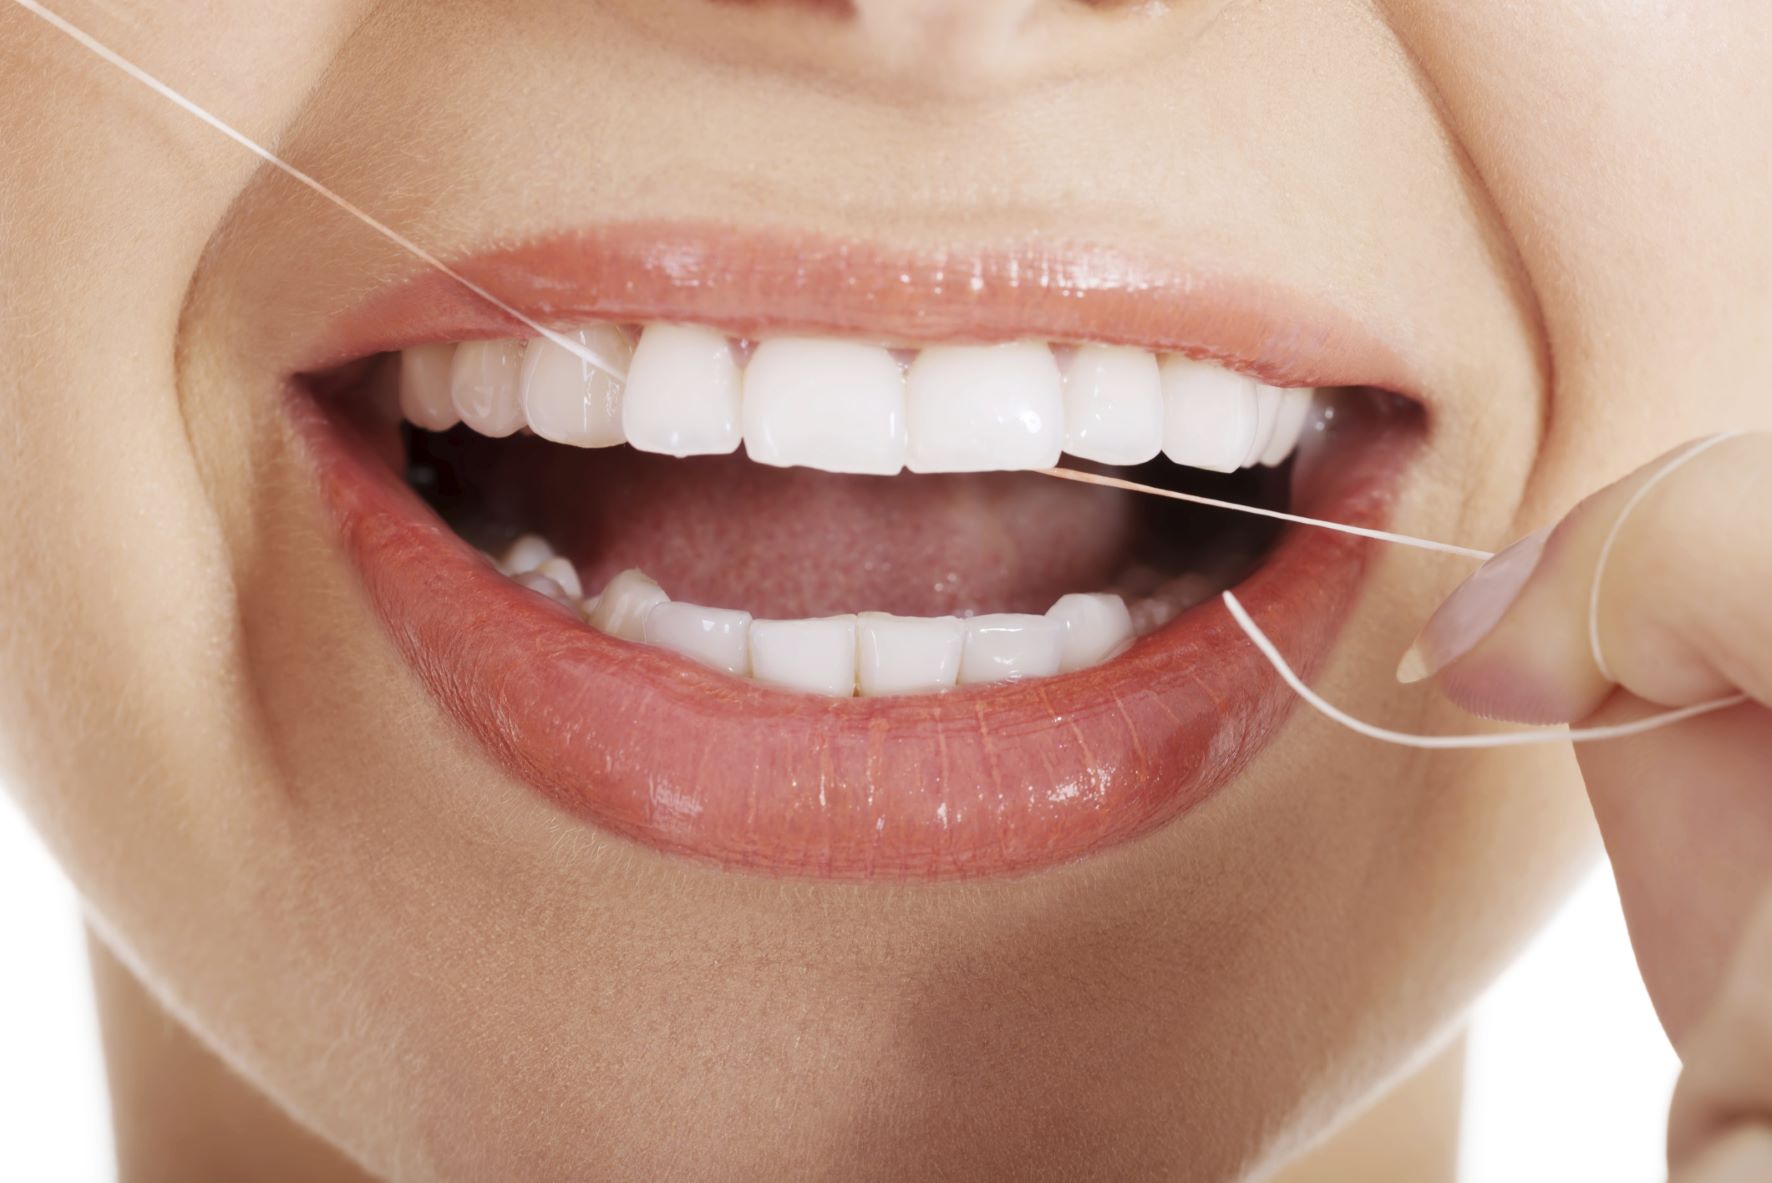 A woman flossing to show the importance of flossing for oral care